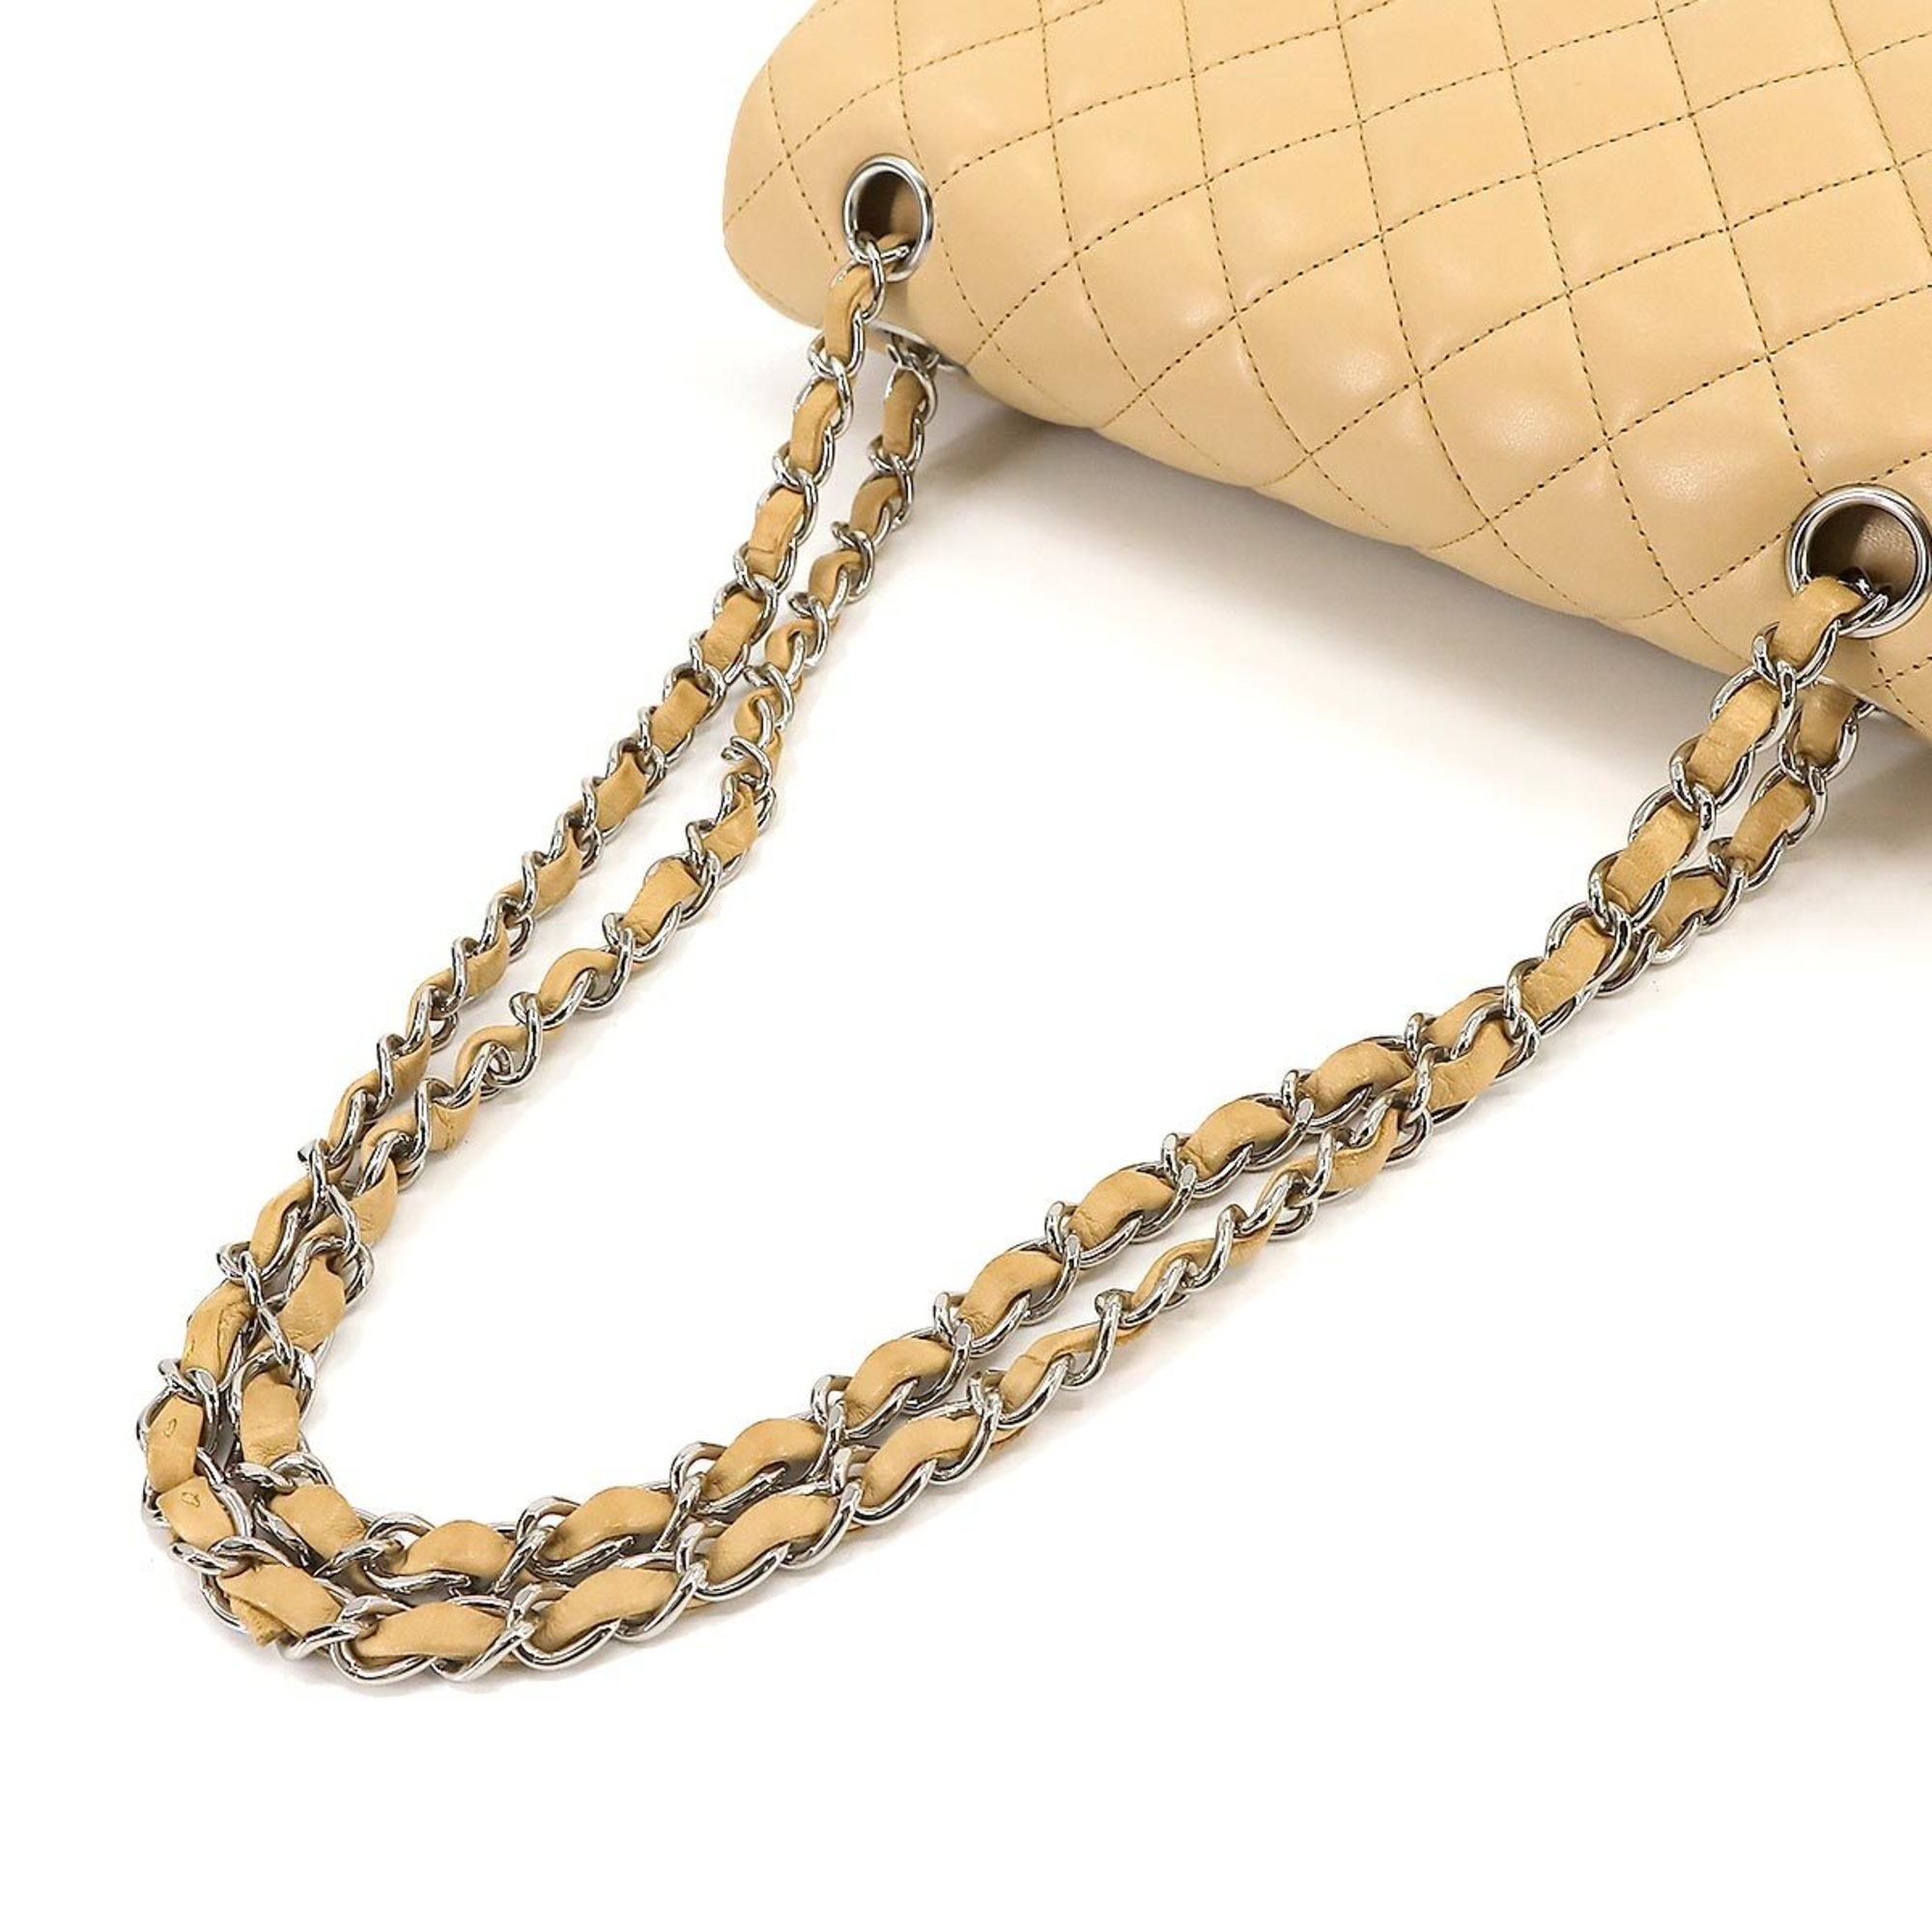 CHANEL Matelasse 25 Chain Shoulder Bag Leather Beige A01112 Silver Metal Fittings Here Mark